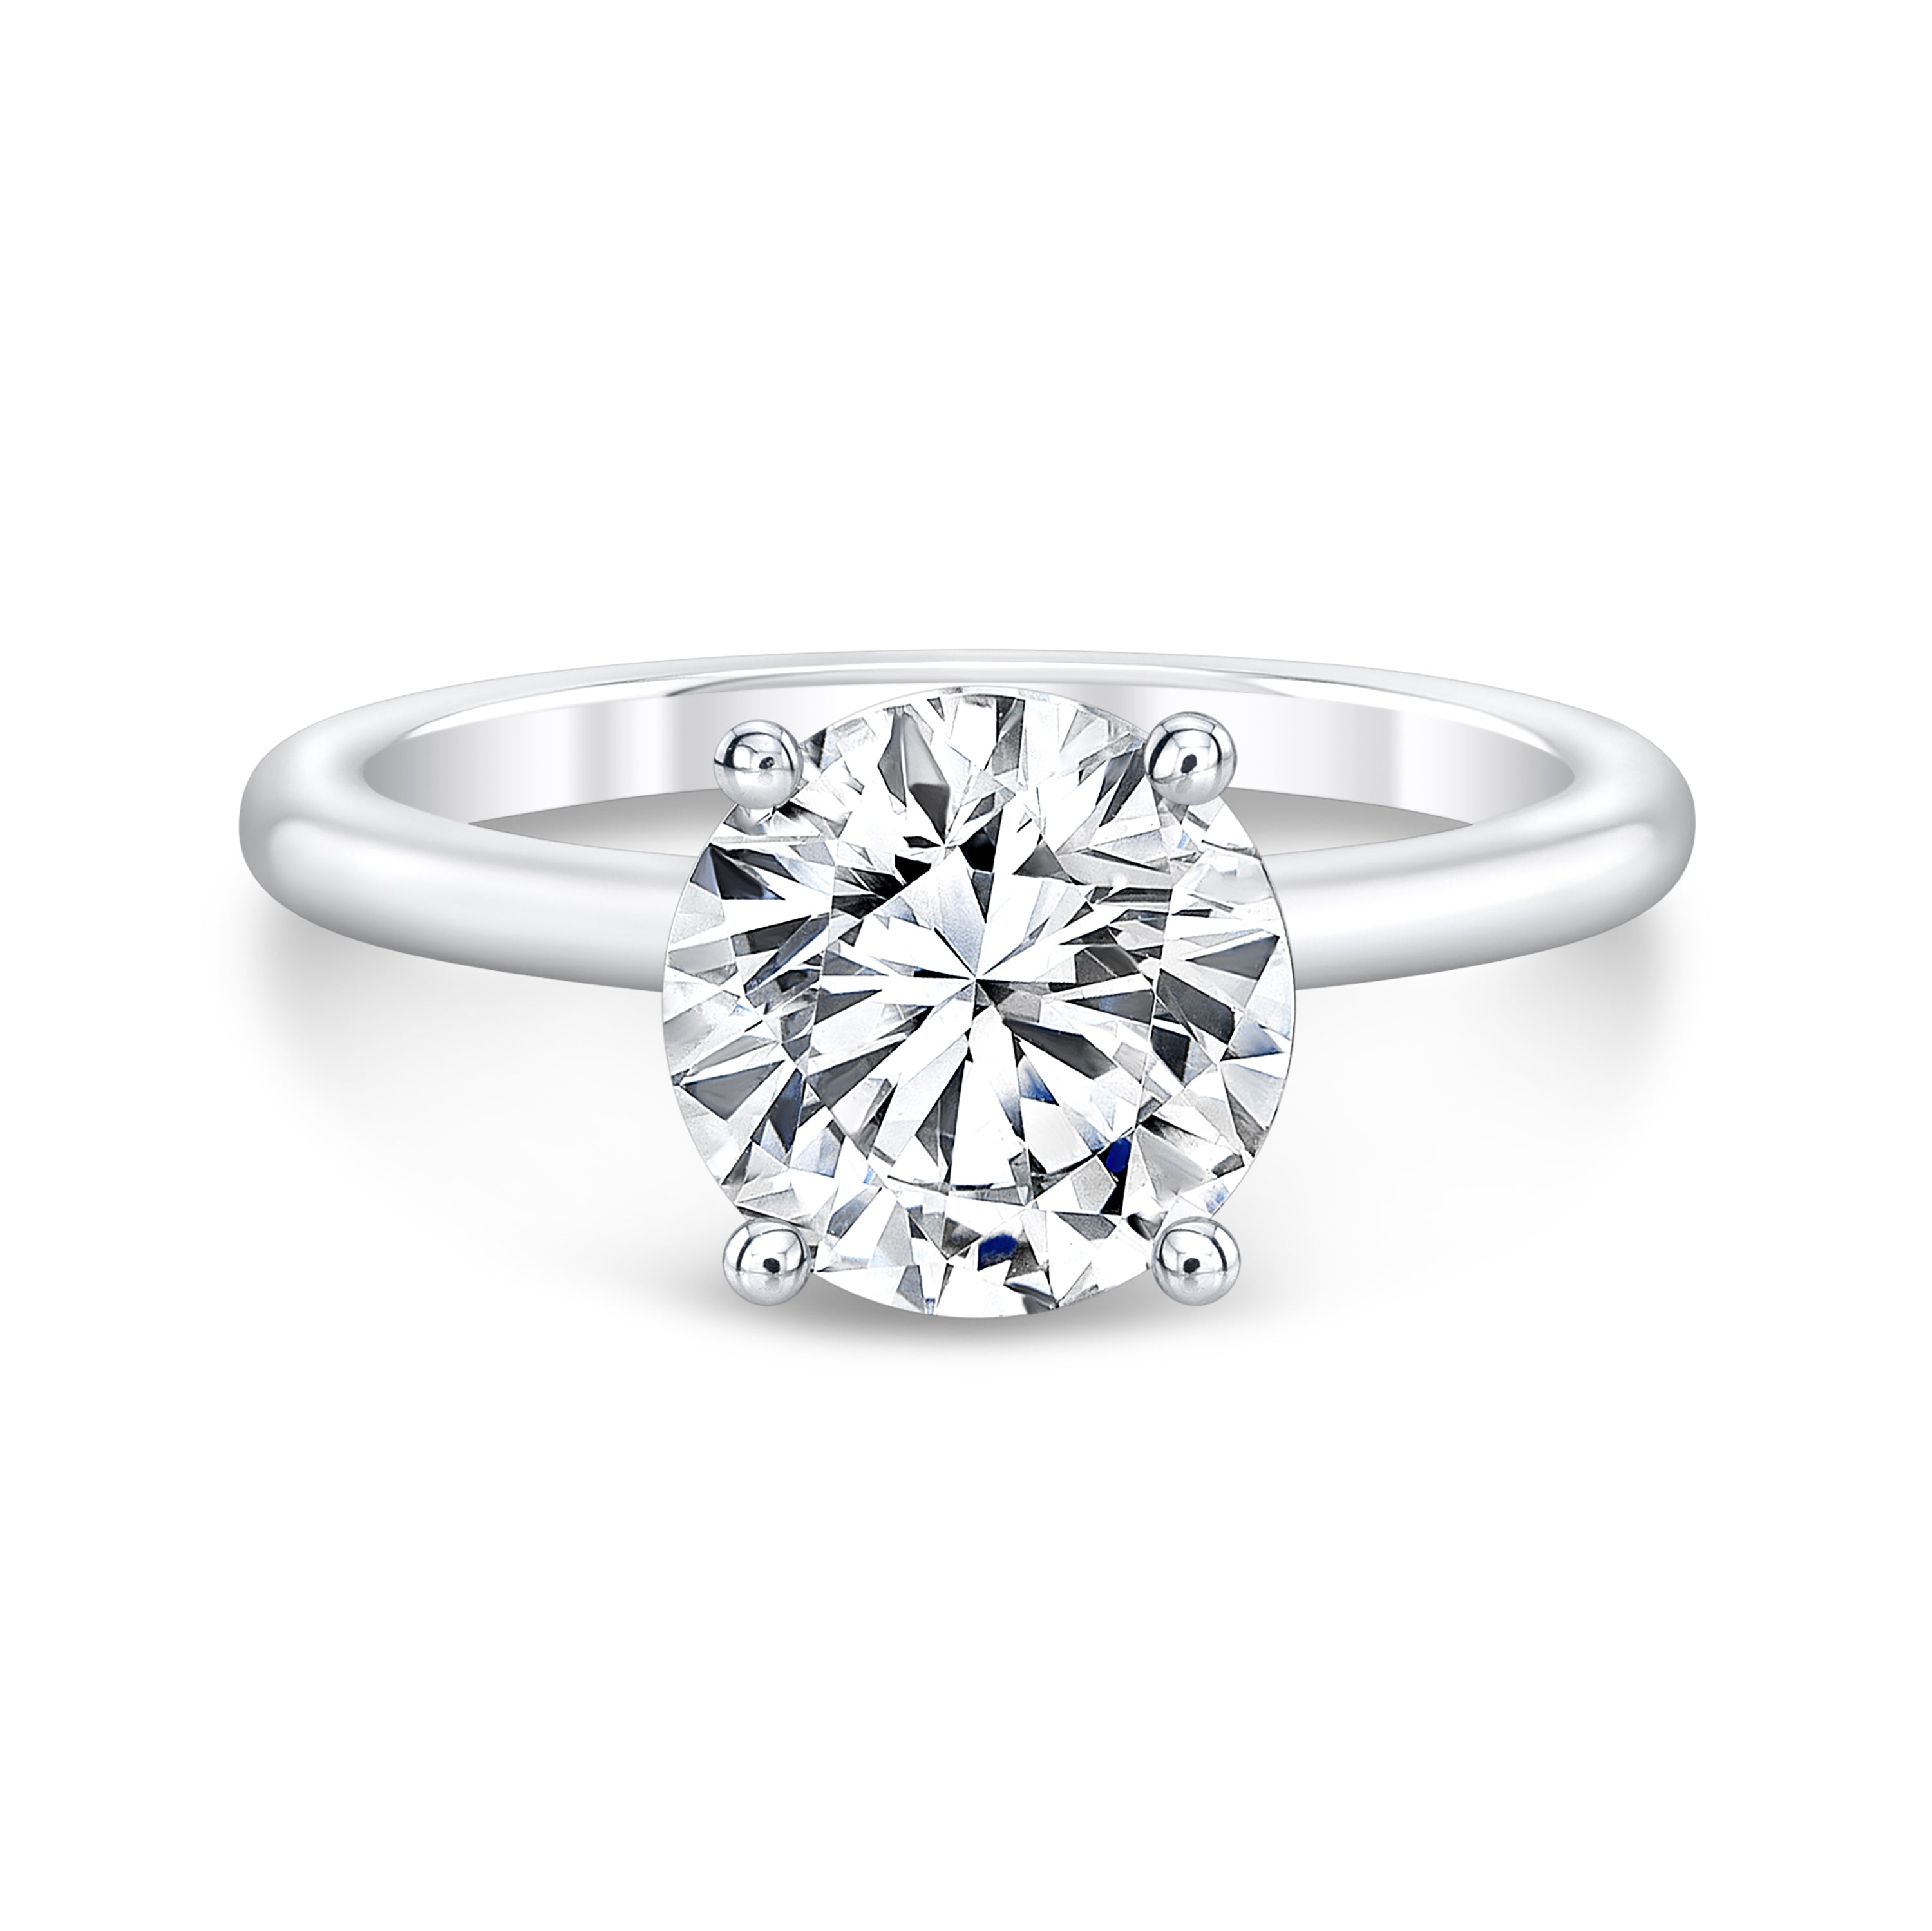 Celine Solitaire Engagement Ring